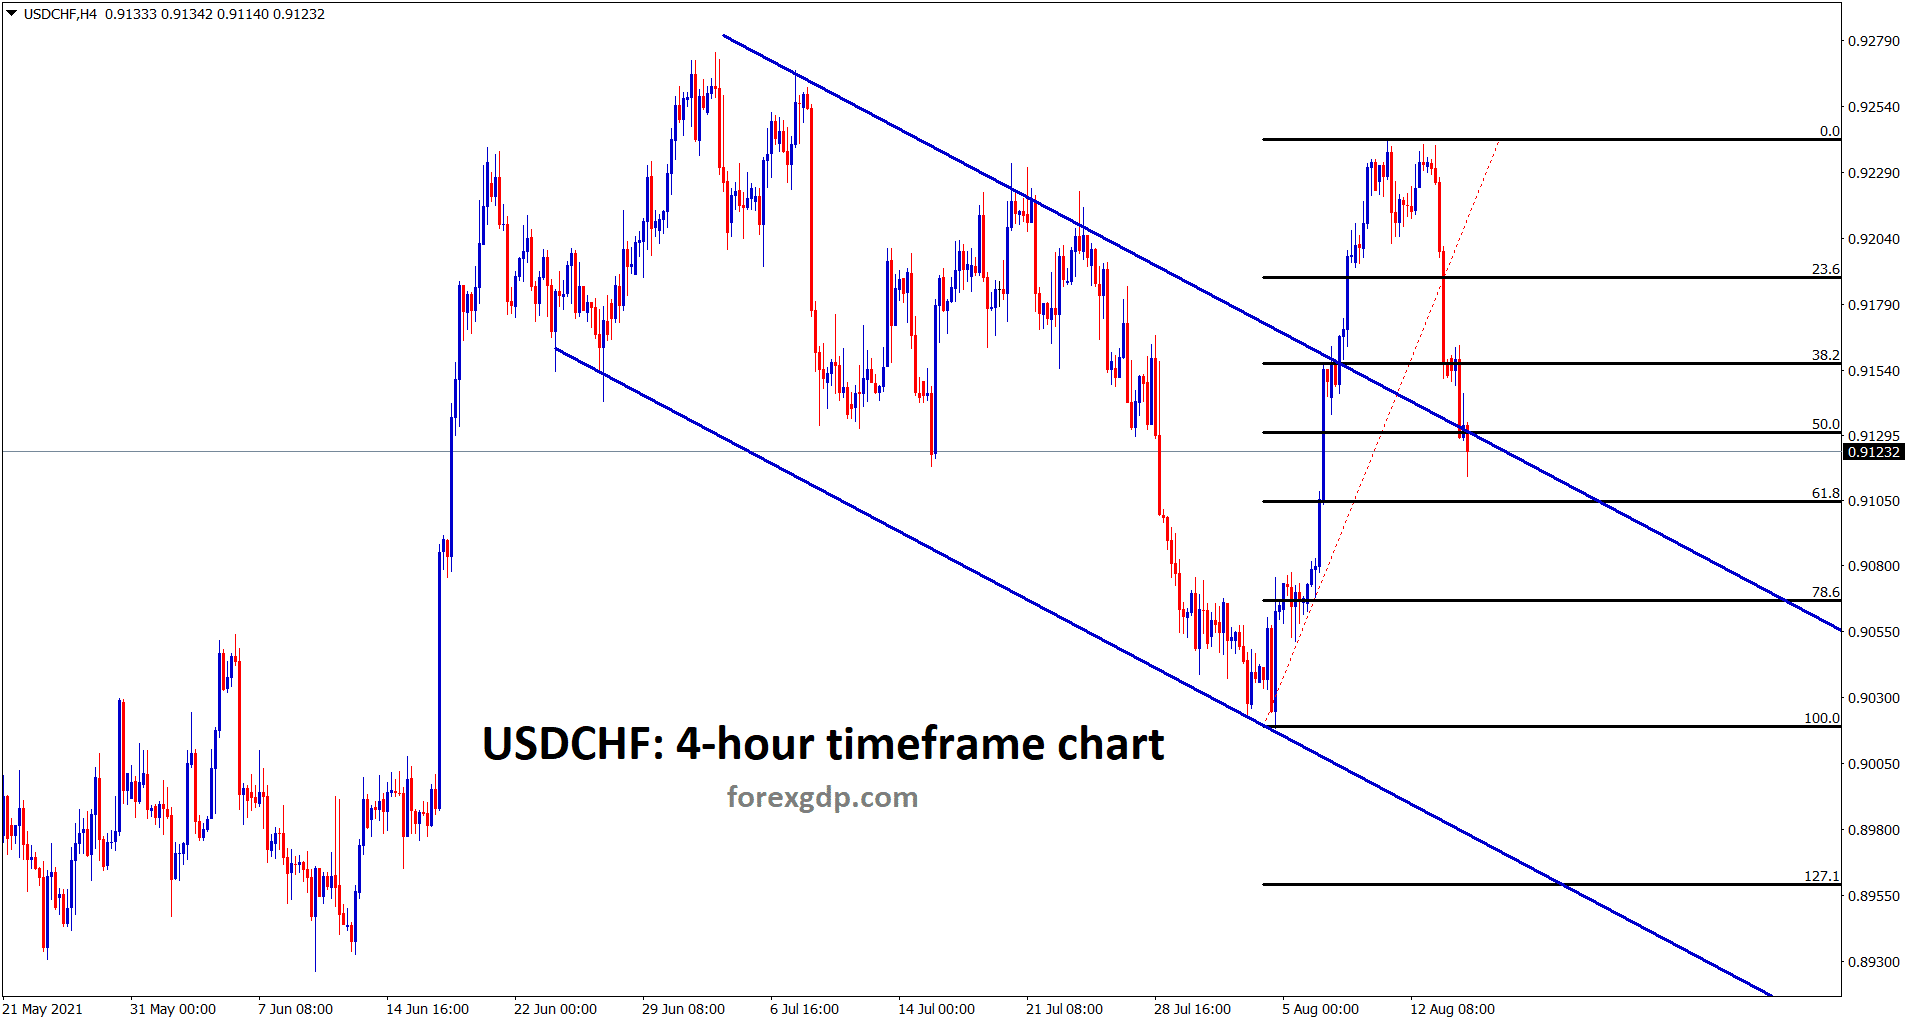 USDCHF is at the retest area of the old broken descending channel